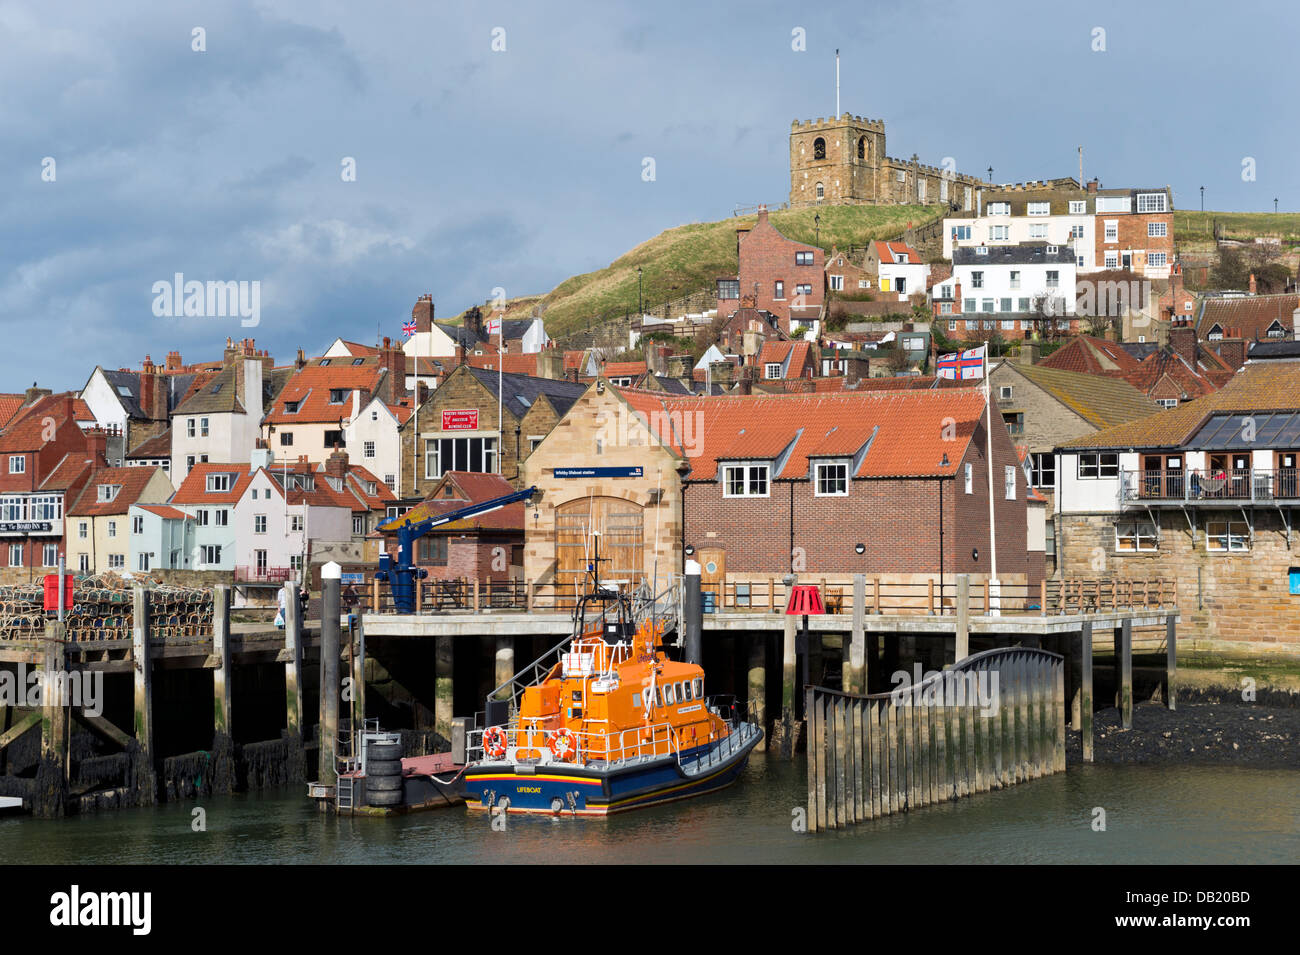 The harbour, with the Lifeboat moored at the quay and St Mary's Church on the cliffs above, Whitby, Yorkshire, UK Stock Photo